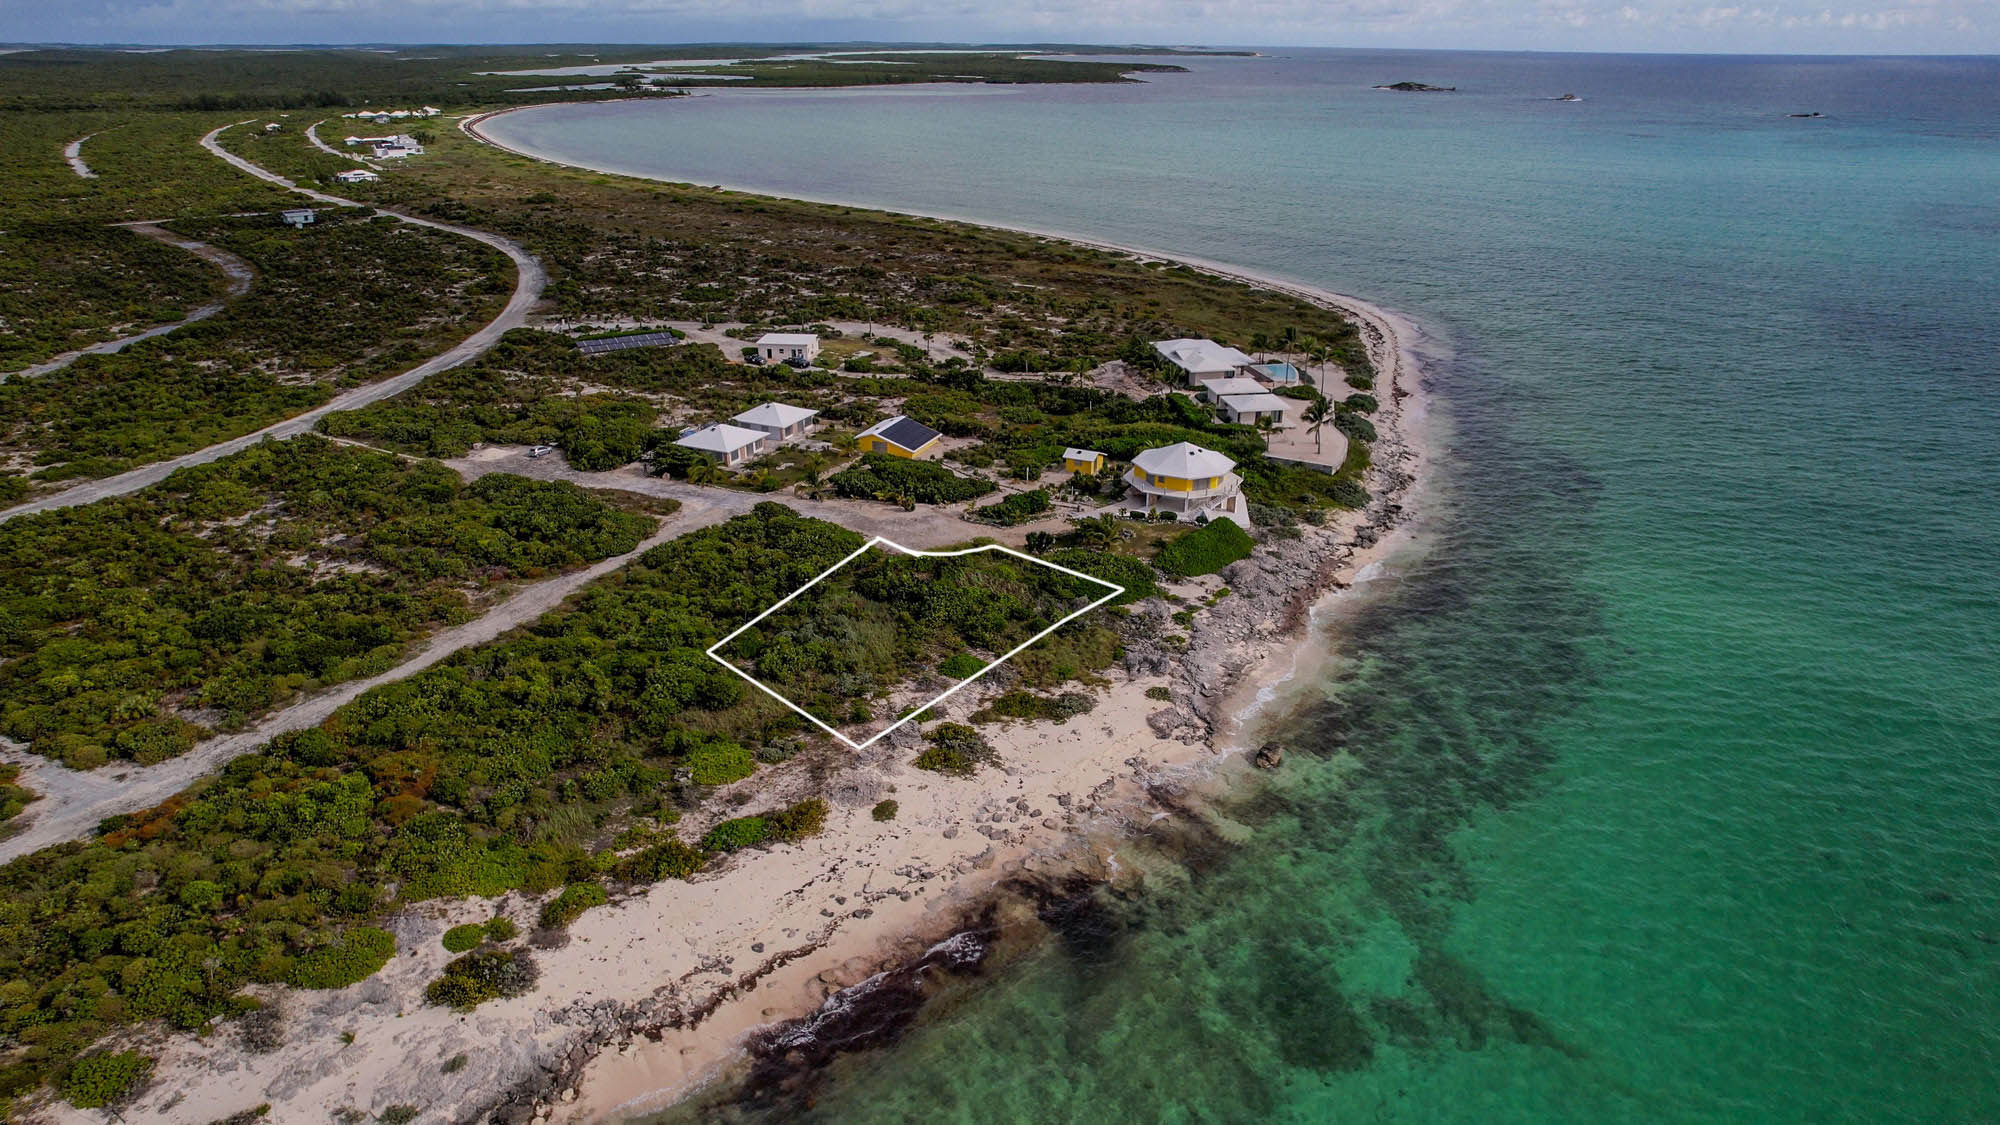 Vacant Beachfront Lot for sale in Snow Bay, San Salvador, The Bahamas